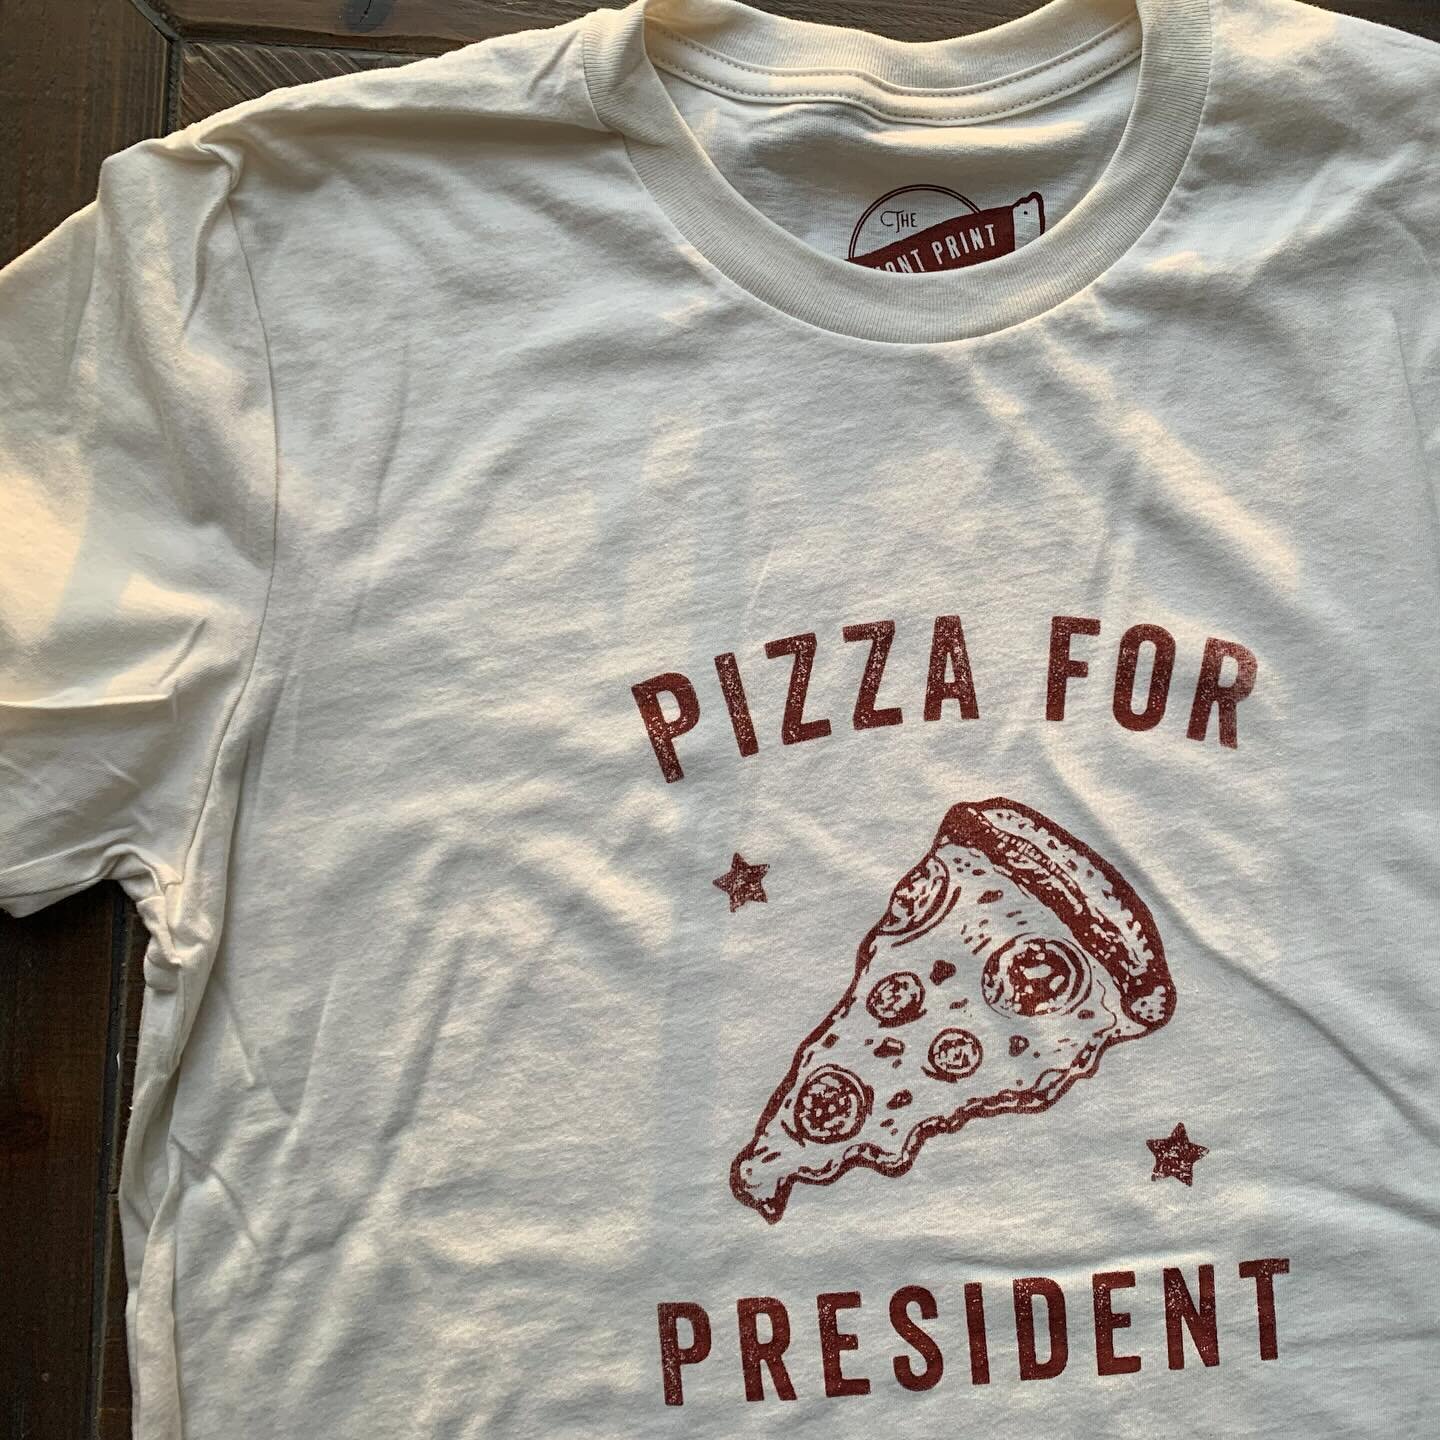 In Carbs We Trust. 🍕 These 100% cotton tees are now available in the online shop (unisex sizes S-XXL) #vermontartist #vermontprint #screenprinting #pizzaforpresident #pizzalover #pizzatime